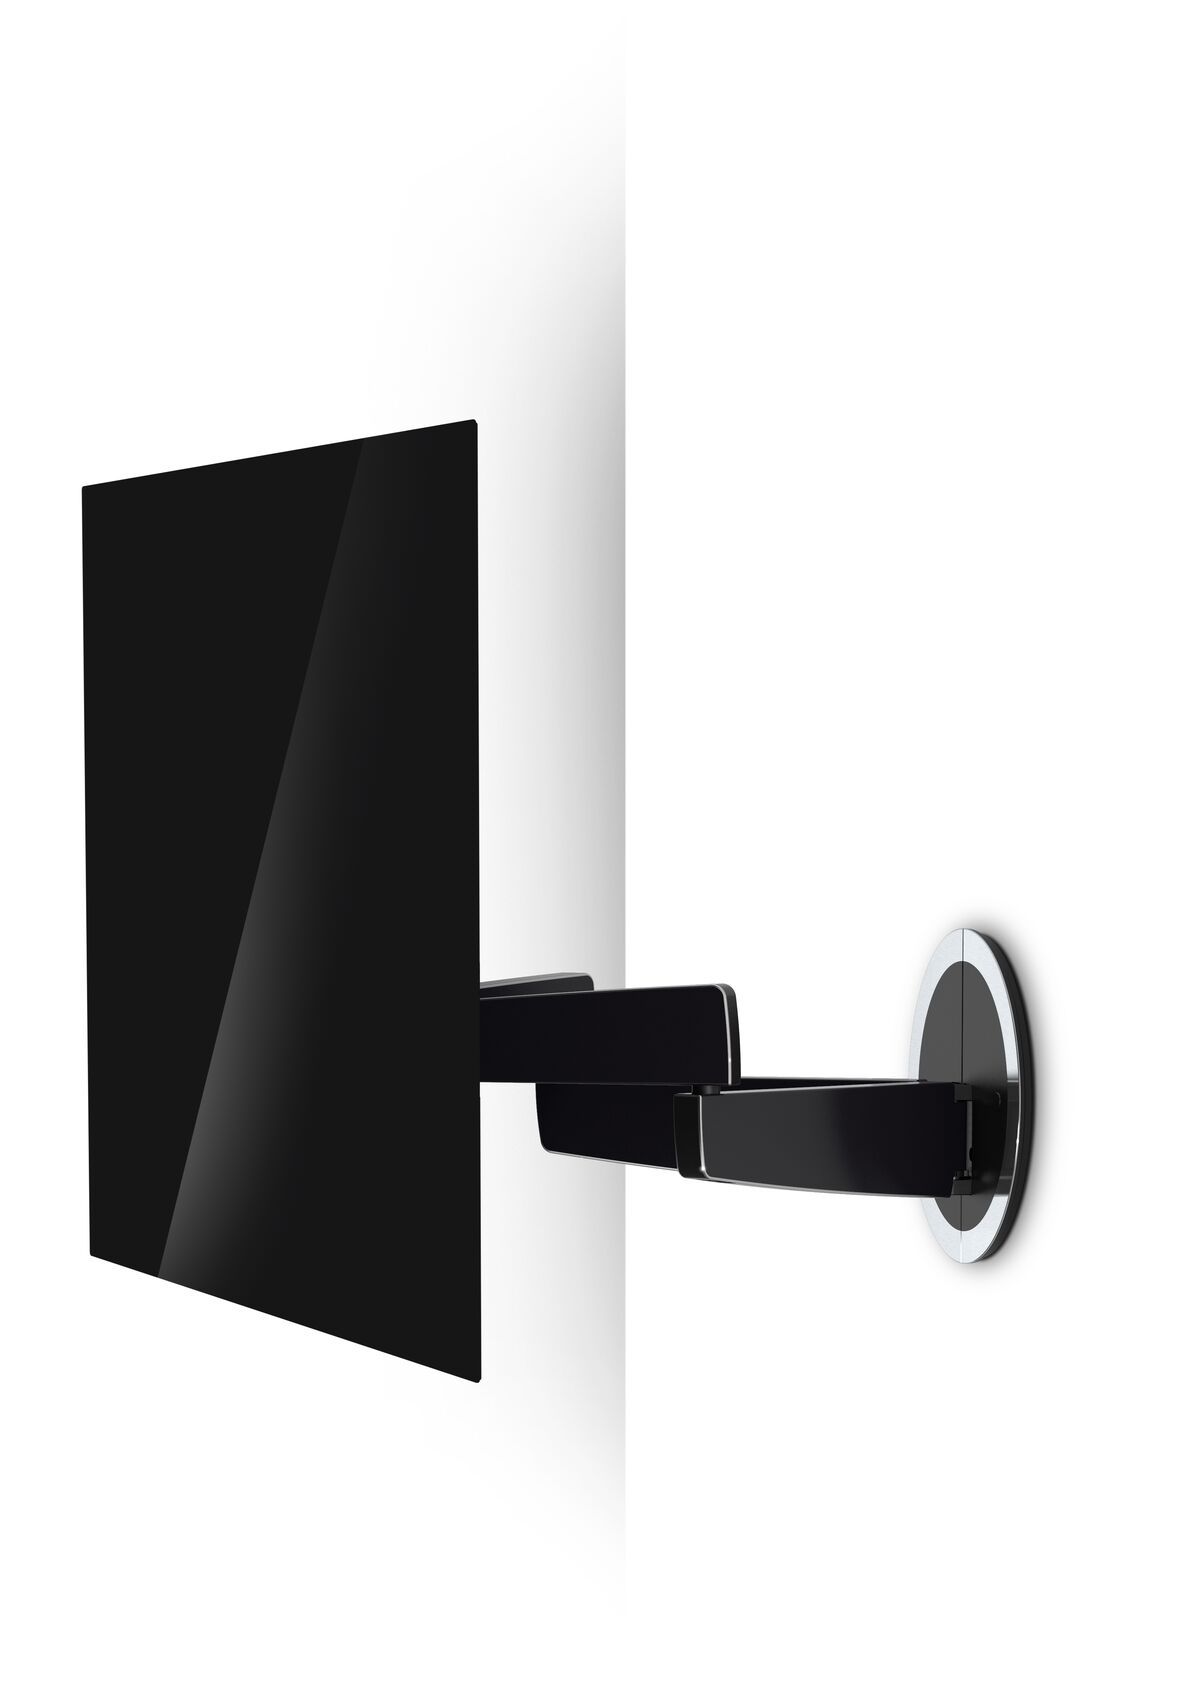 Vogel's NEXT 7346 Full-Motion OLED TV Wall Mount - Suitable for 40 up to 65 inch TVs up to Motion (up to 120°) - White wall